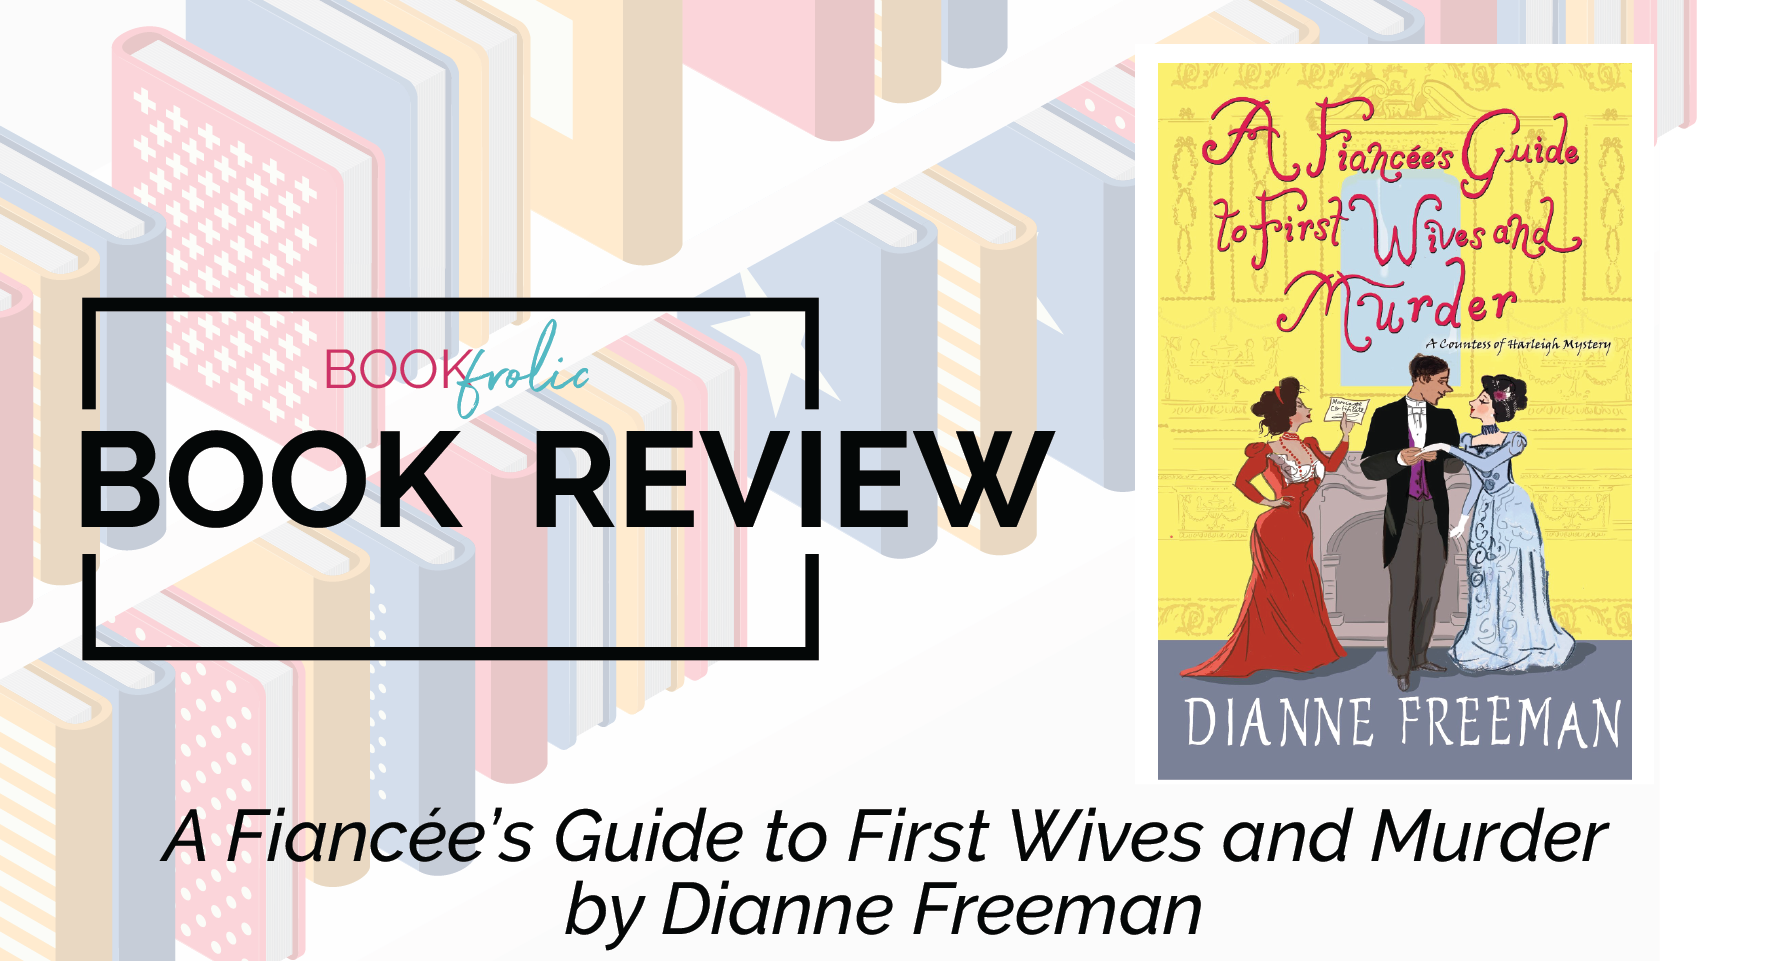 banner for book review for A Fiancée's Guide to First Wives and Murder by Dianne Freeman